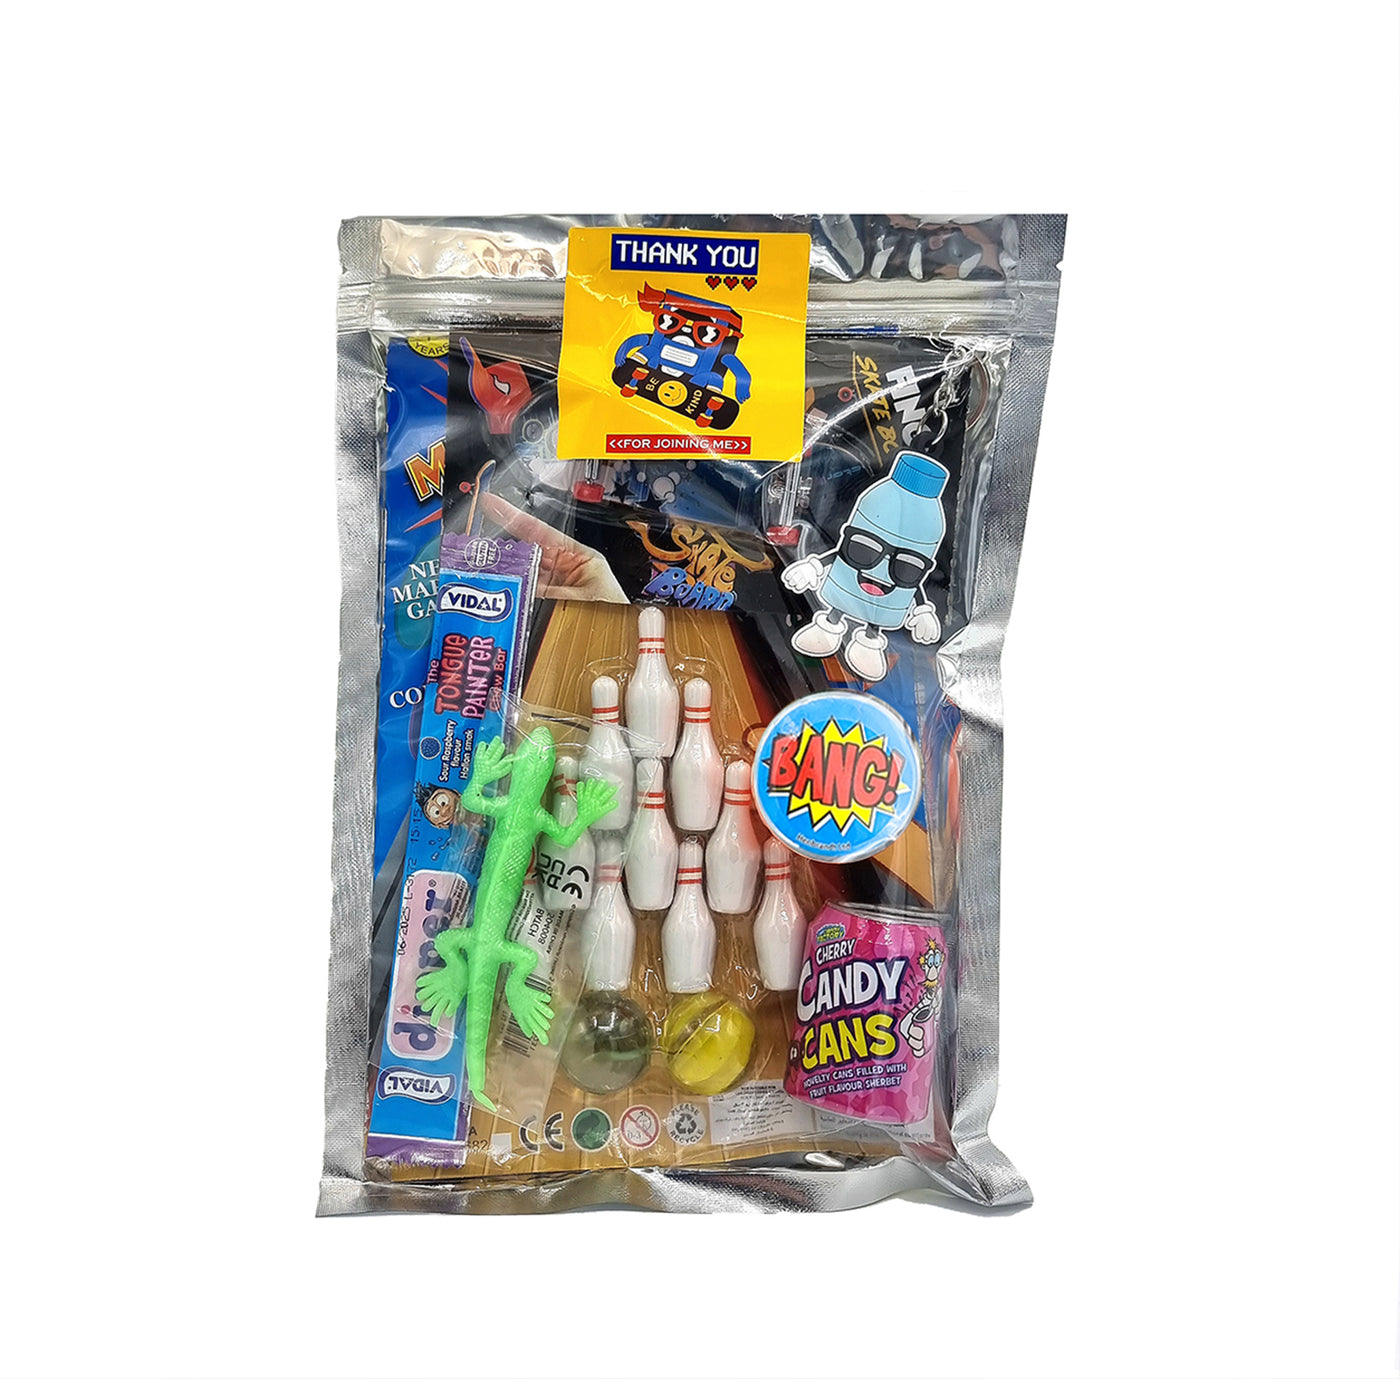 Pre Filled Older Boys Teens Birthday Bowling Skateboarding Birthday Party Goody Bags, Favours Gifts.